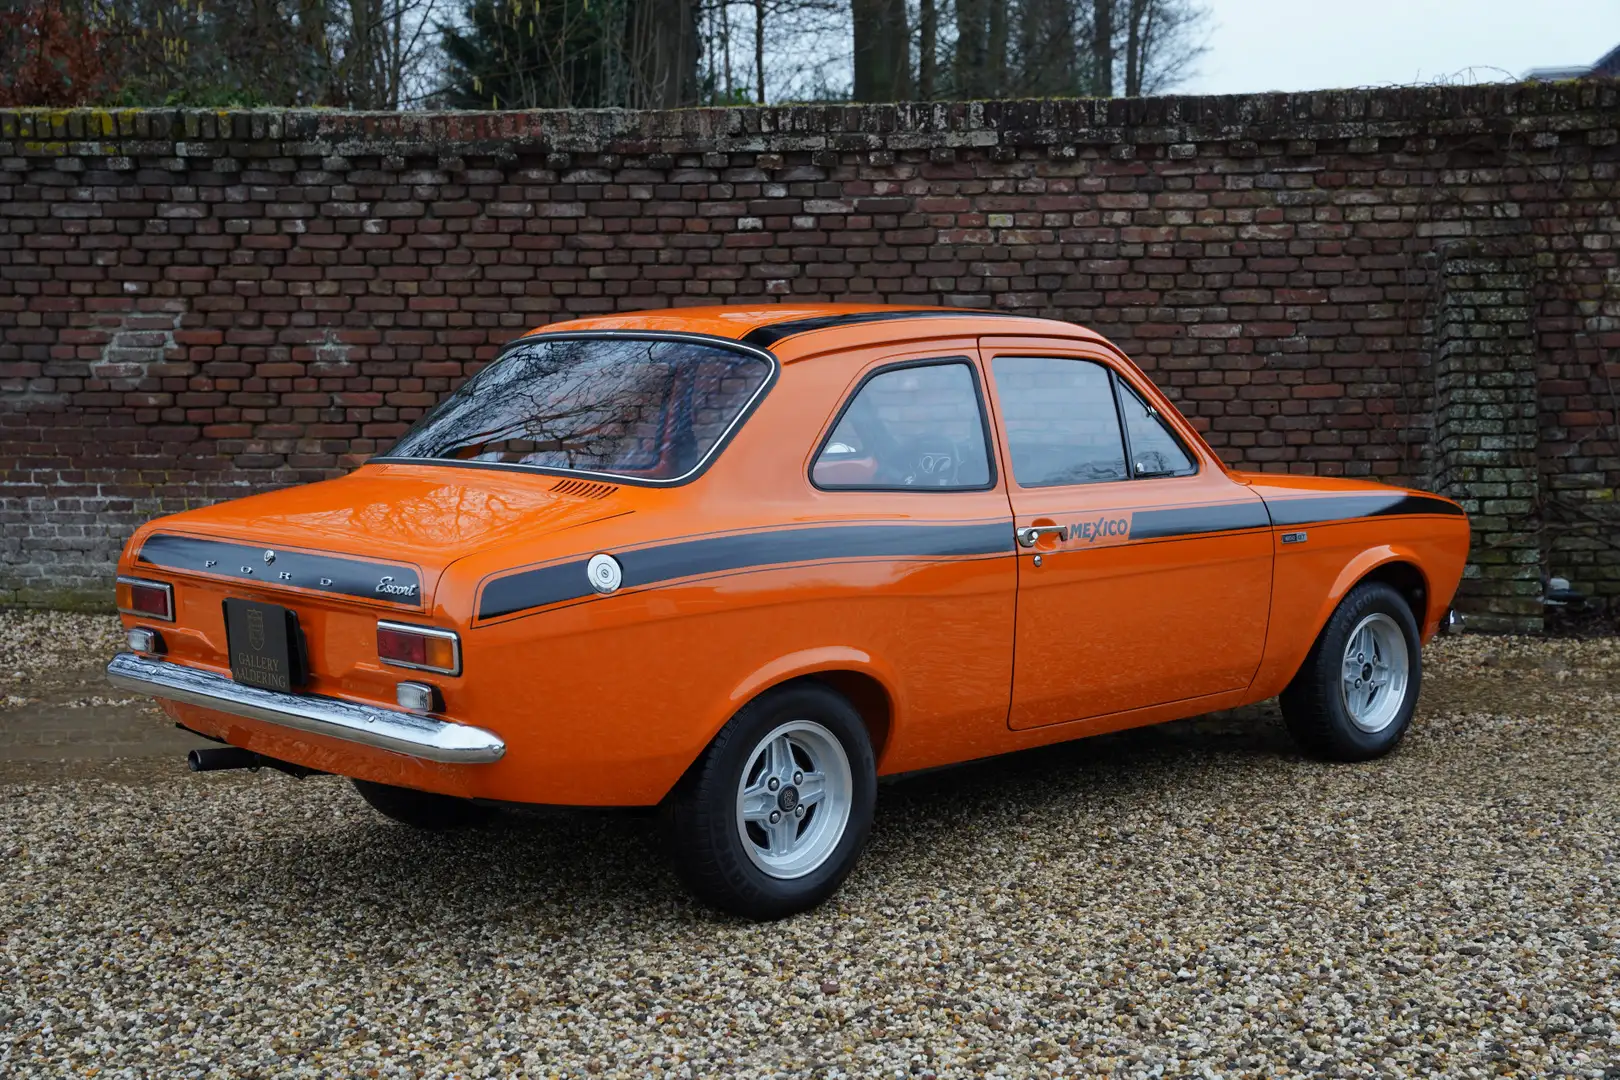 Ford Escort RS Mexico 1600 GT Mk1 Delivered new in Switzerland Oranj - 2